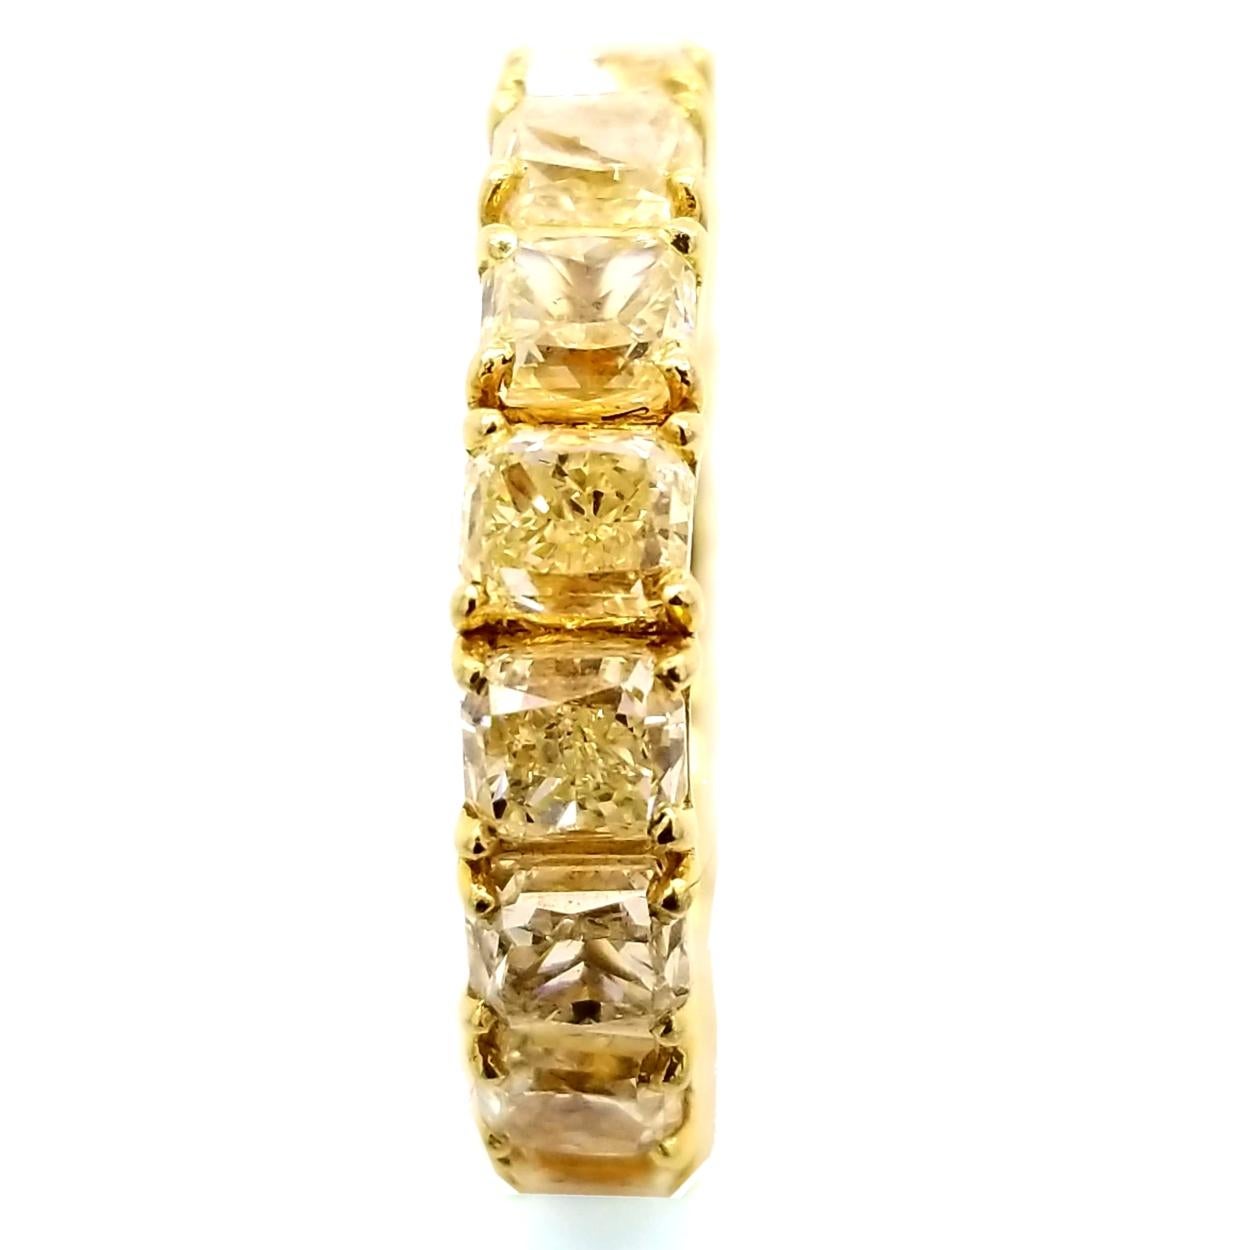 This beautiful Eternity Ring is made in 18K Yellow Gold with 17 perfectly matched Fancy Yellow Radiant Diamonds Set in Shared Prong Mode.
Total Weight of diamonds: 8.45 Ct  VS-SI1/Fancy Yellow
Total Weight of the Ring: 7.66 Gr 18K Yellow Gold
Ring